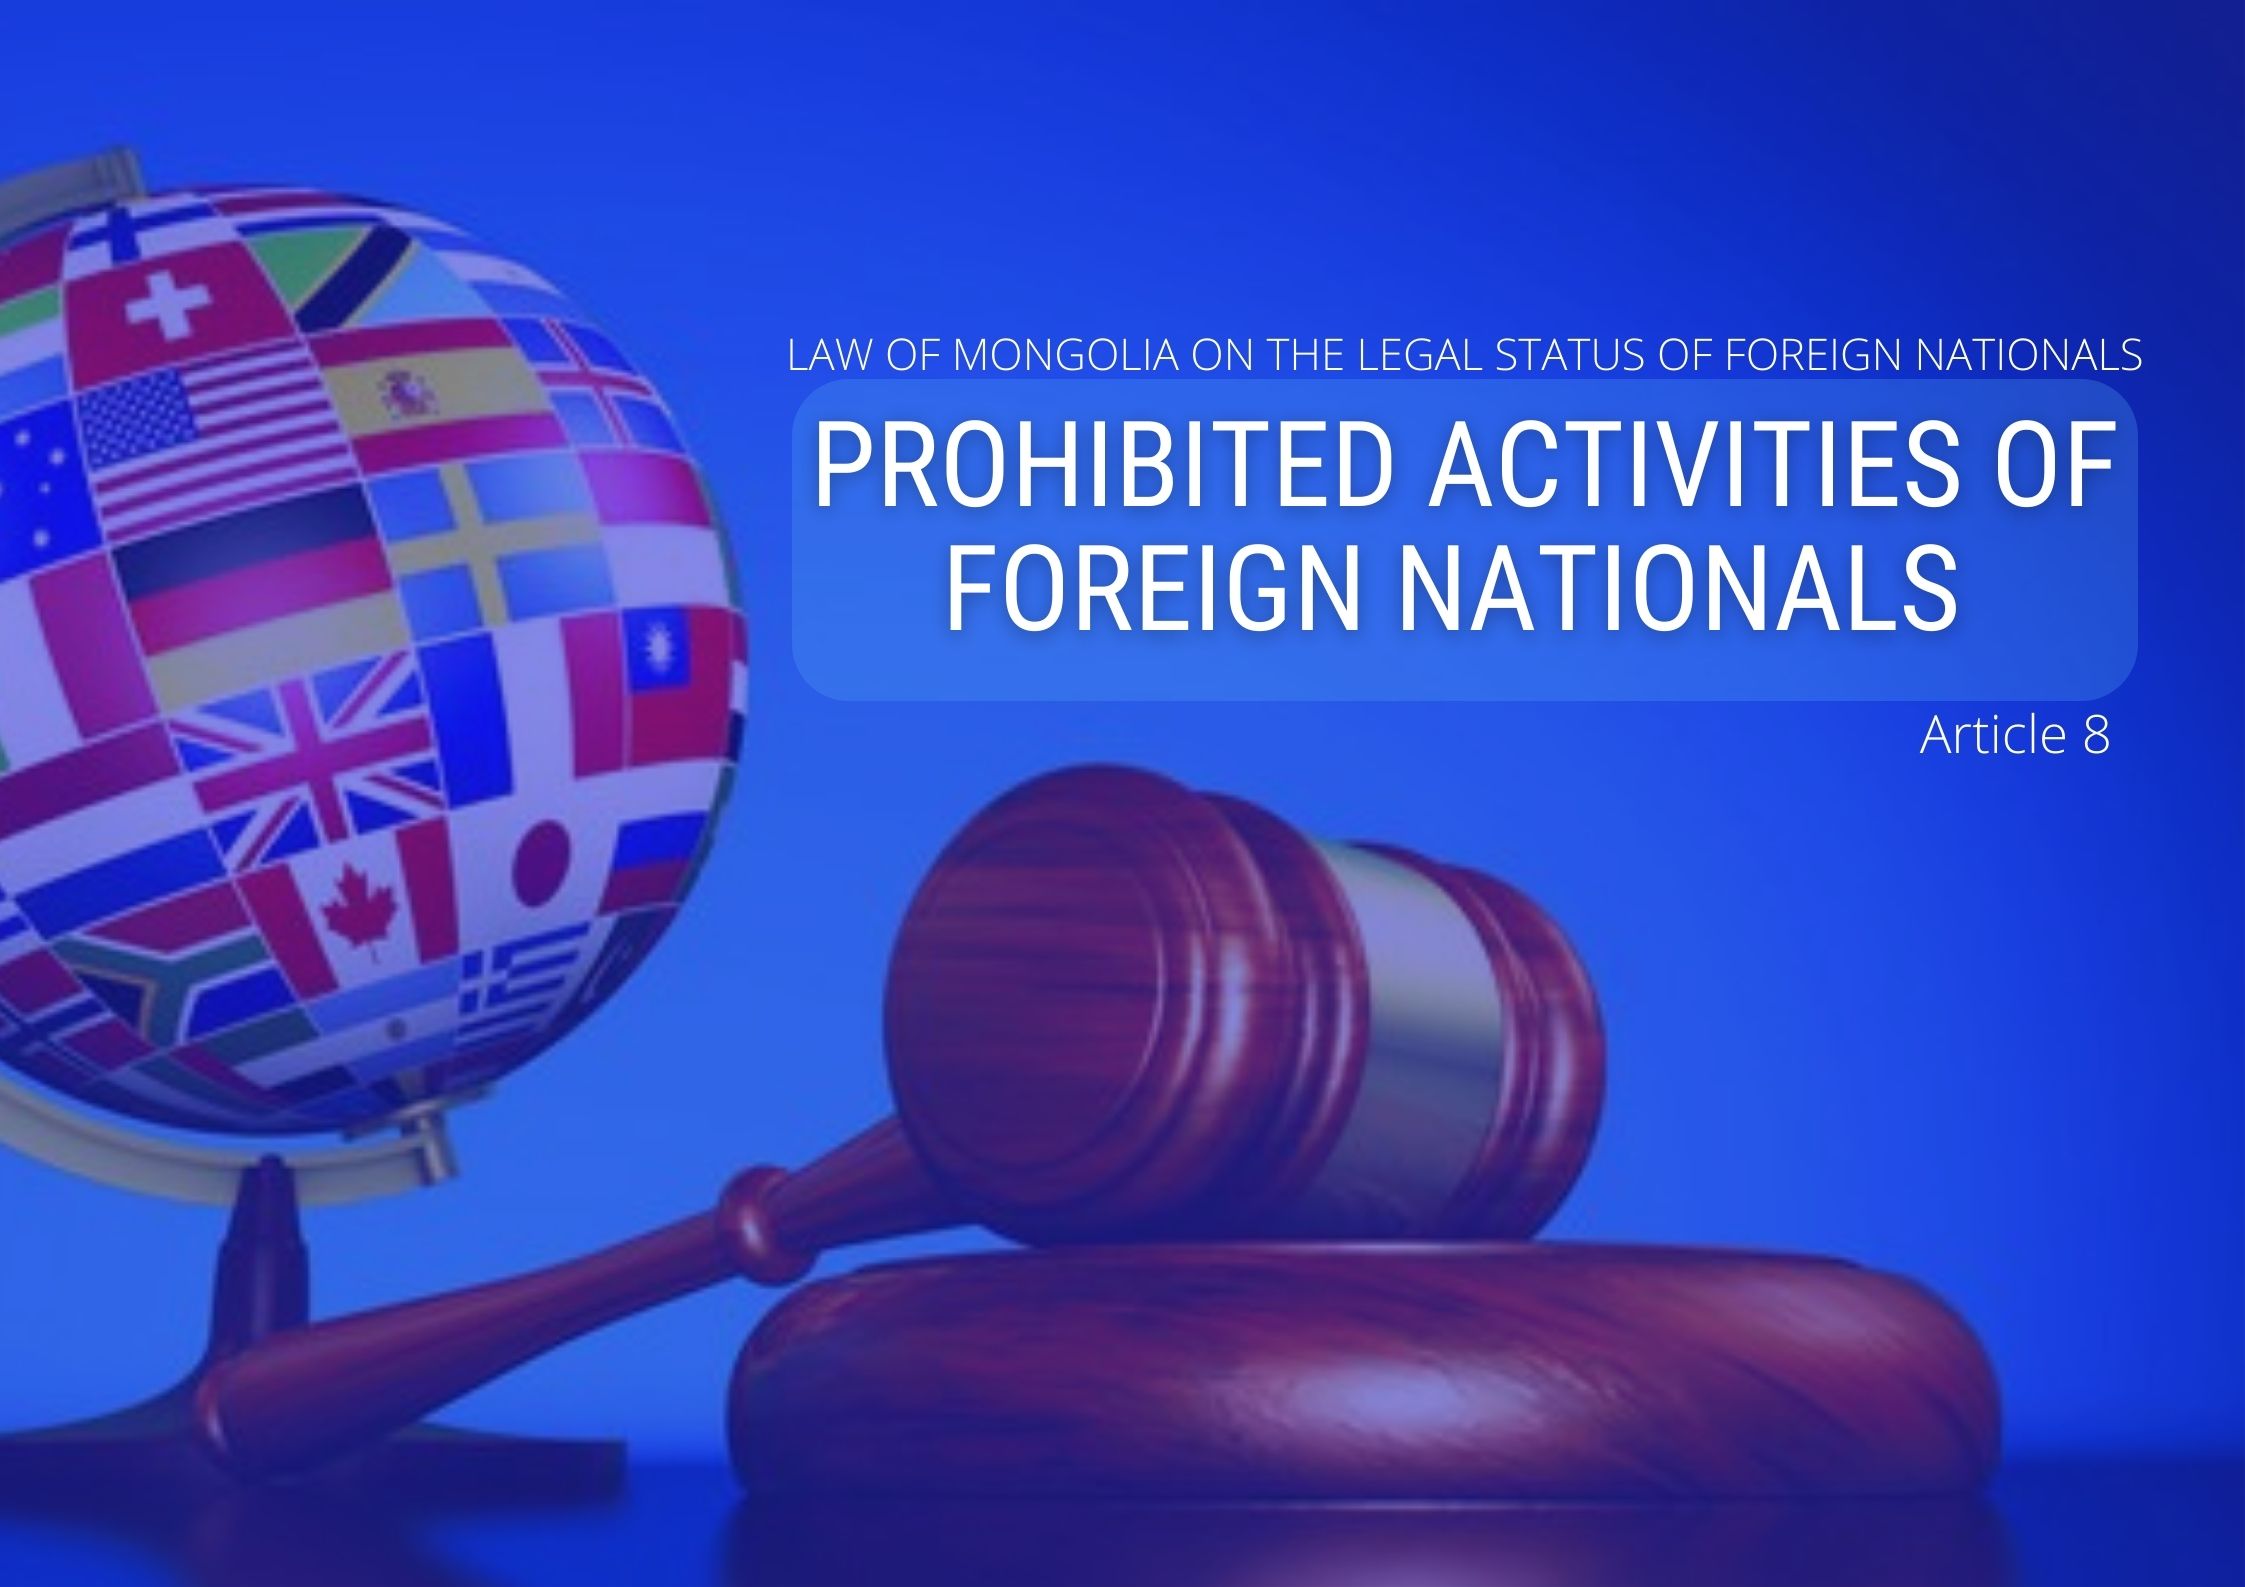 PROHIBITED ACTIVITIES TO THE FOREIGN NATIONALS